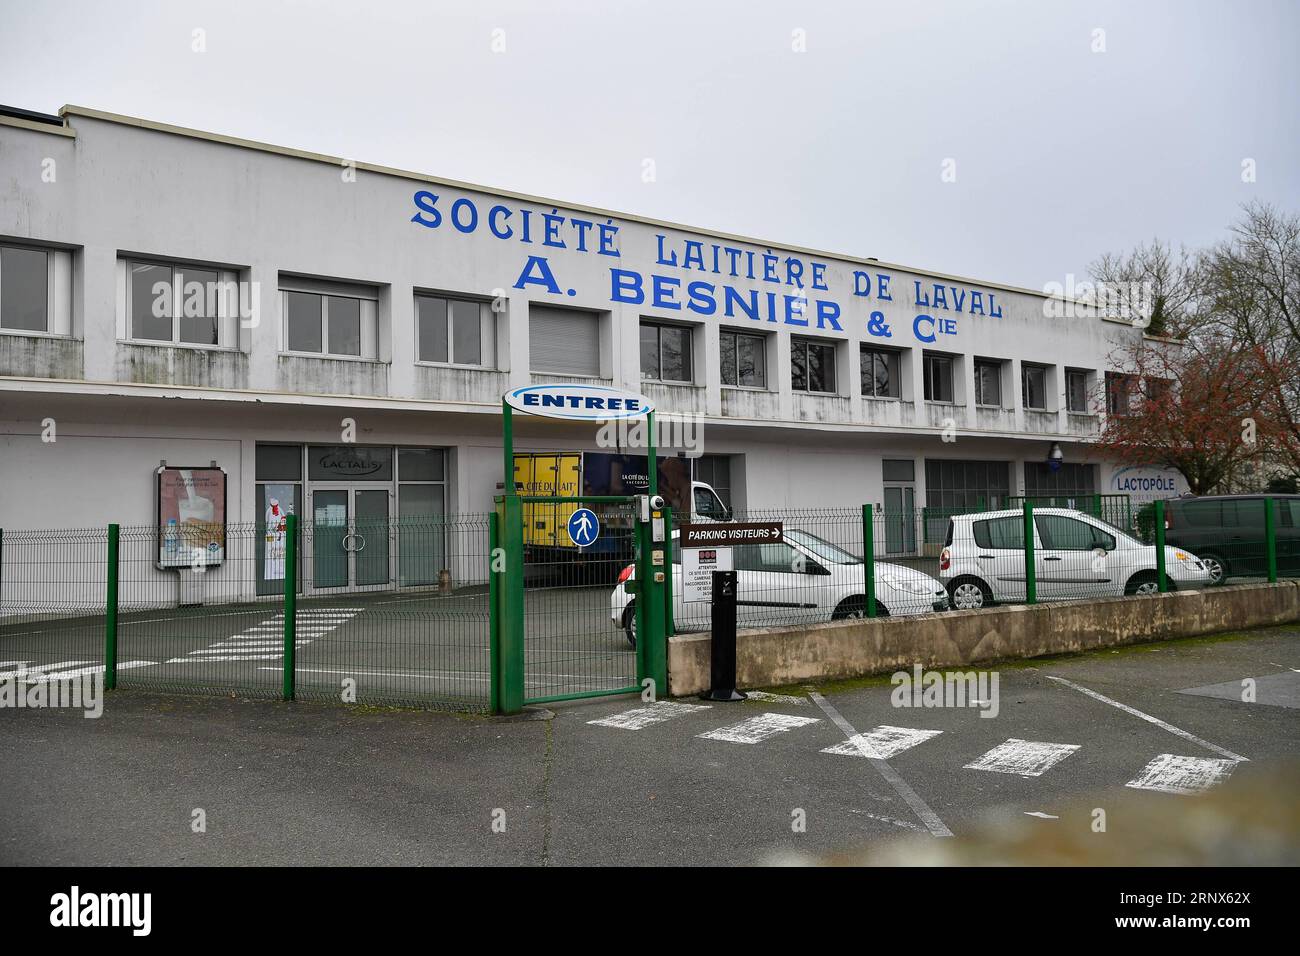 (180114) -- LAVAL, Jan. 14, 2018 -- Photo taken on Jan. 14, 2018 shows the headquarters of the Lactalis Group in Laval, France. Lactalis will extend a product recall to all baby food produced in its factory hit by a contamination scandal, French Minister of Economy Bruno Le Maire said on Friday. ) (zjy) FRANCE-LAVAL-CONTAMINATED MILK POWDER-RECALL-LACTALIS ChenxYichen PUBLICATIONxNOTxINxCHN Stock Photo